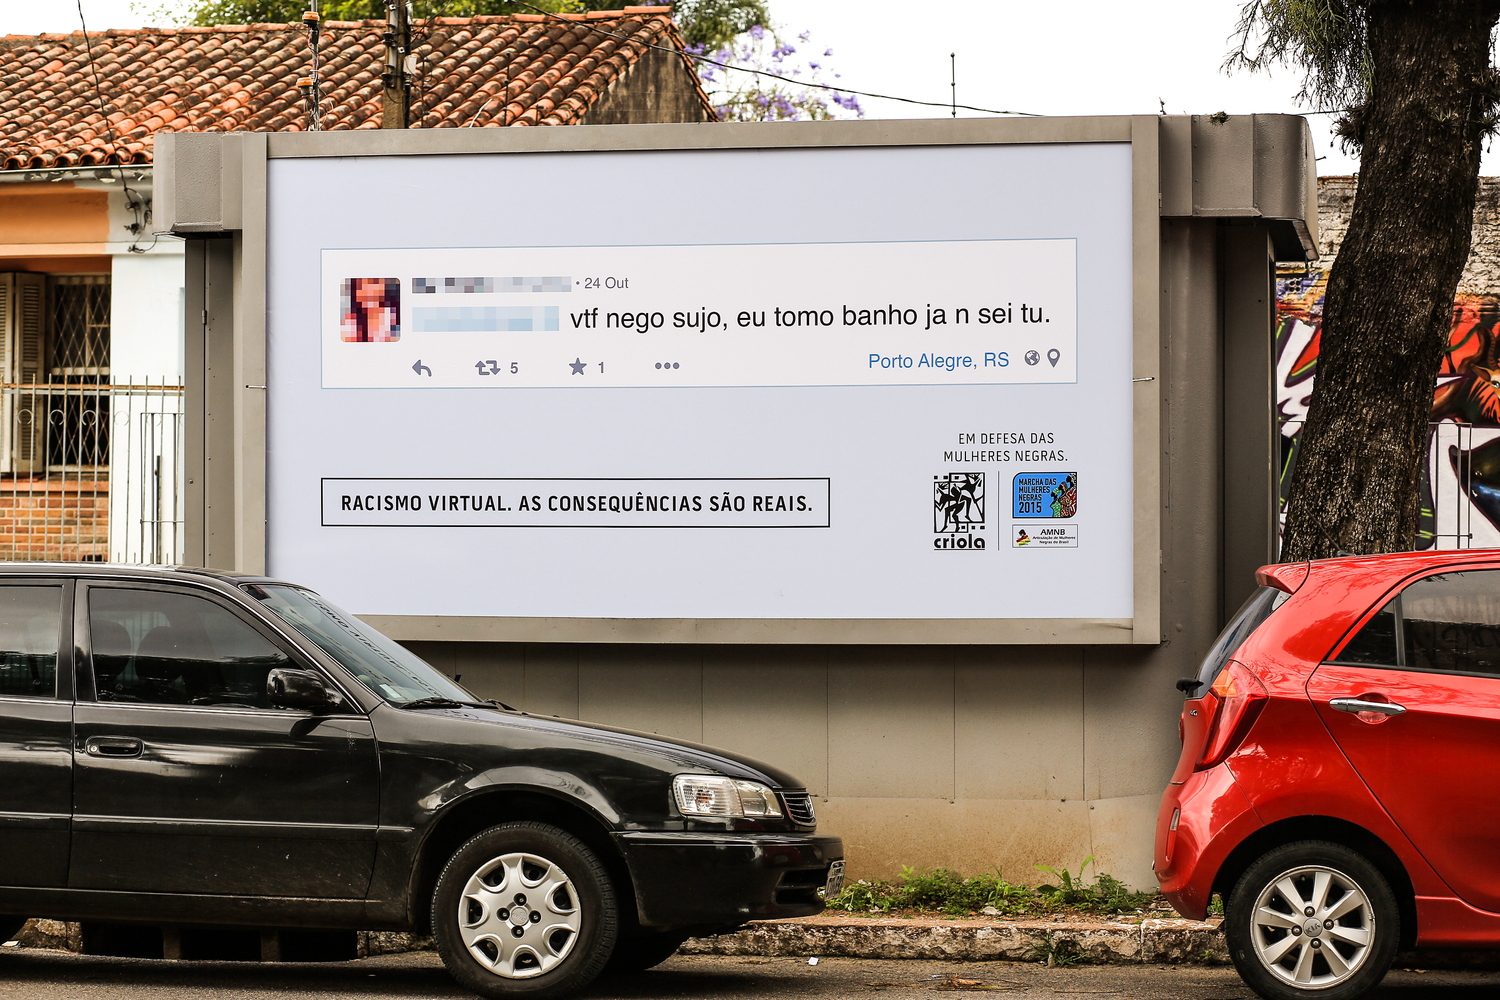 group-fights-online-racism-using-billboards-2